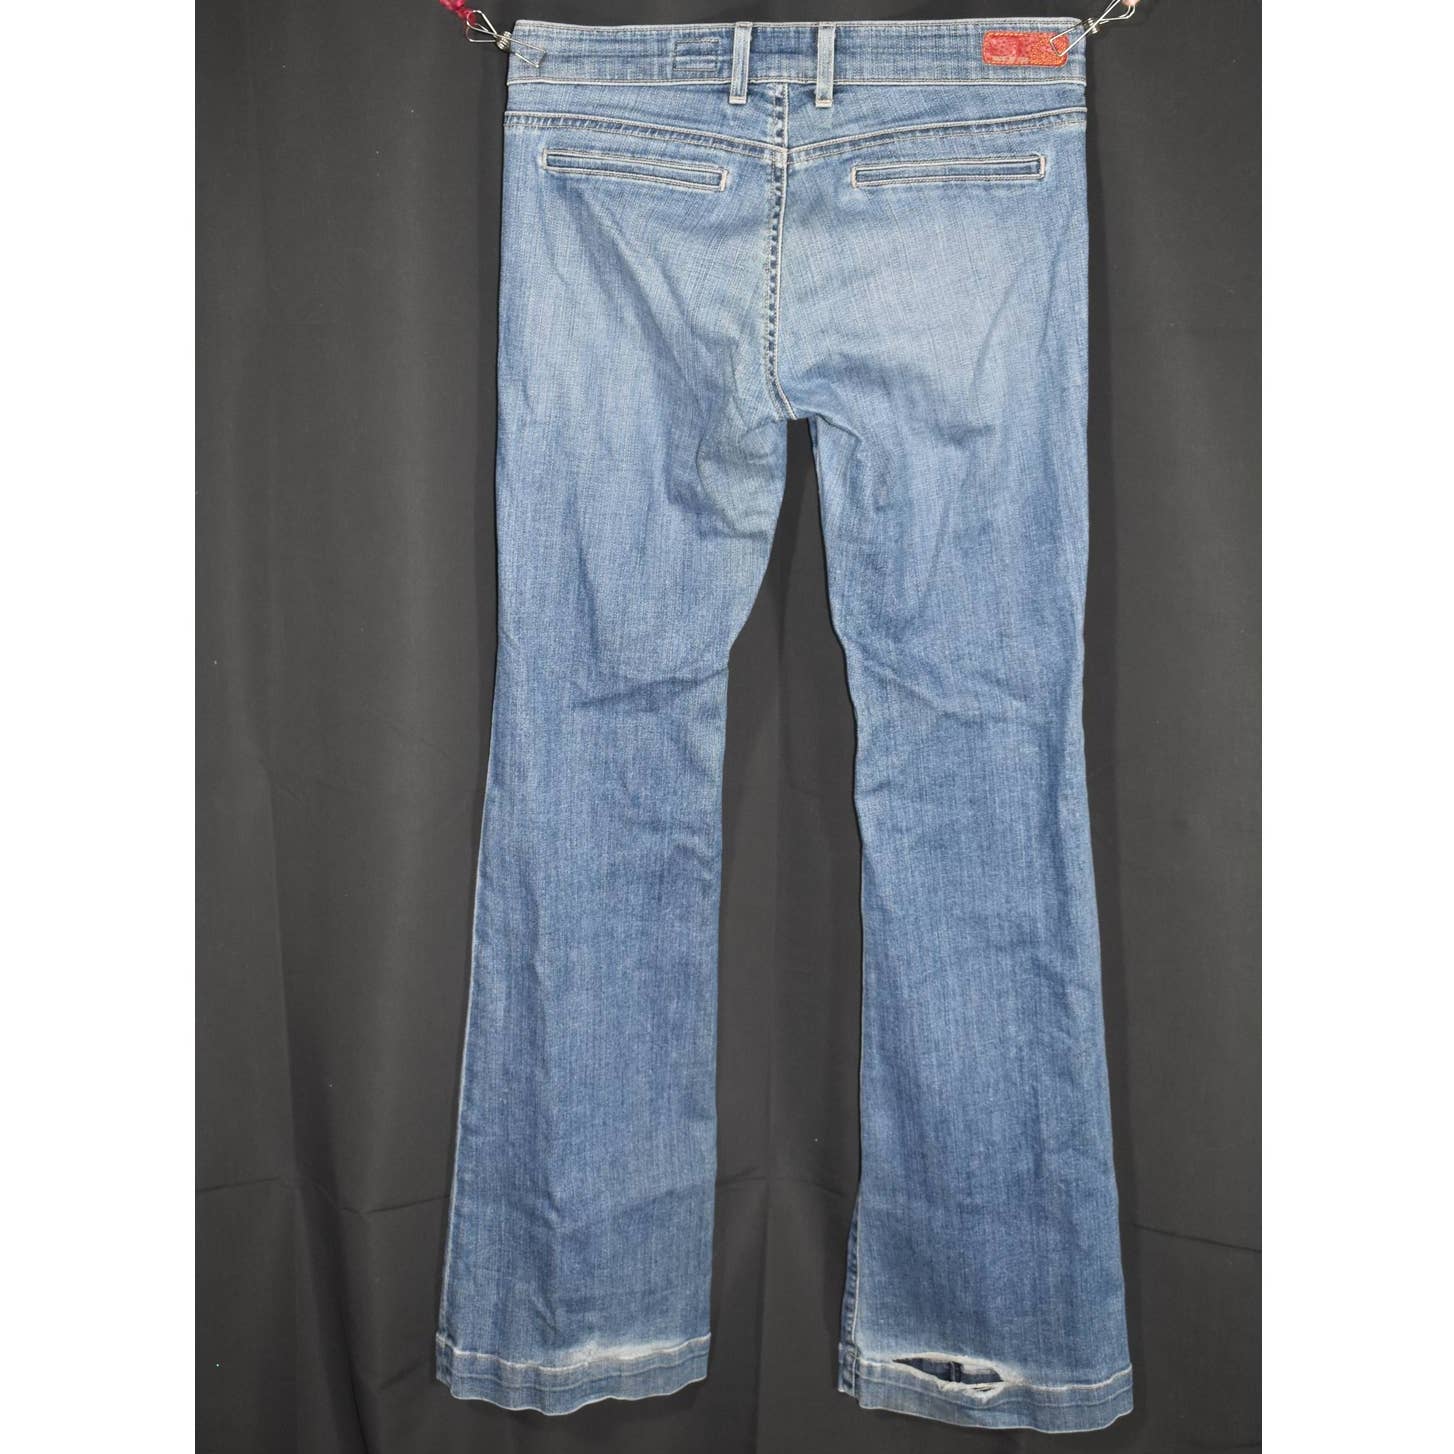 AG Adriano Goldscmied The Mia Pintuck Flare Jeans- 27R